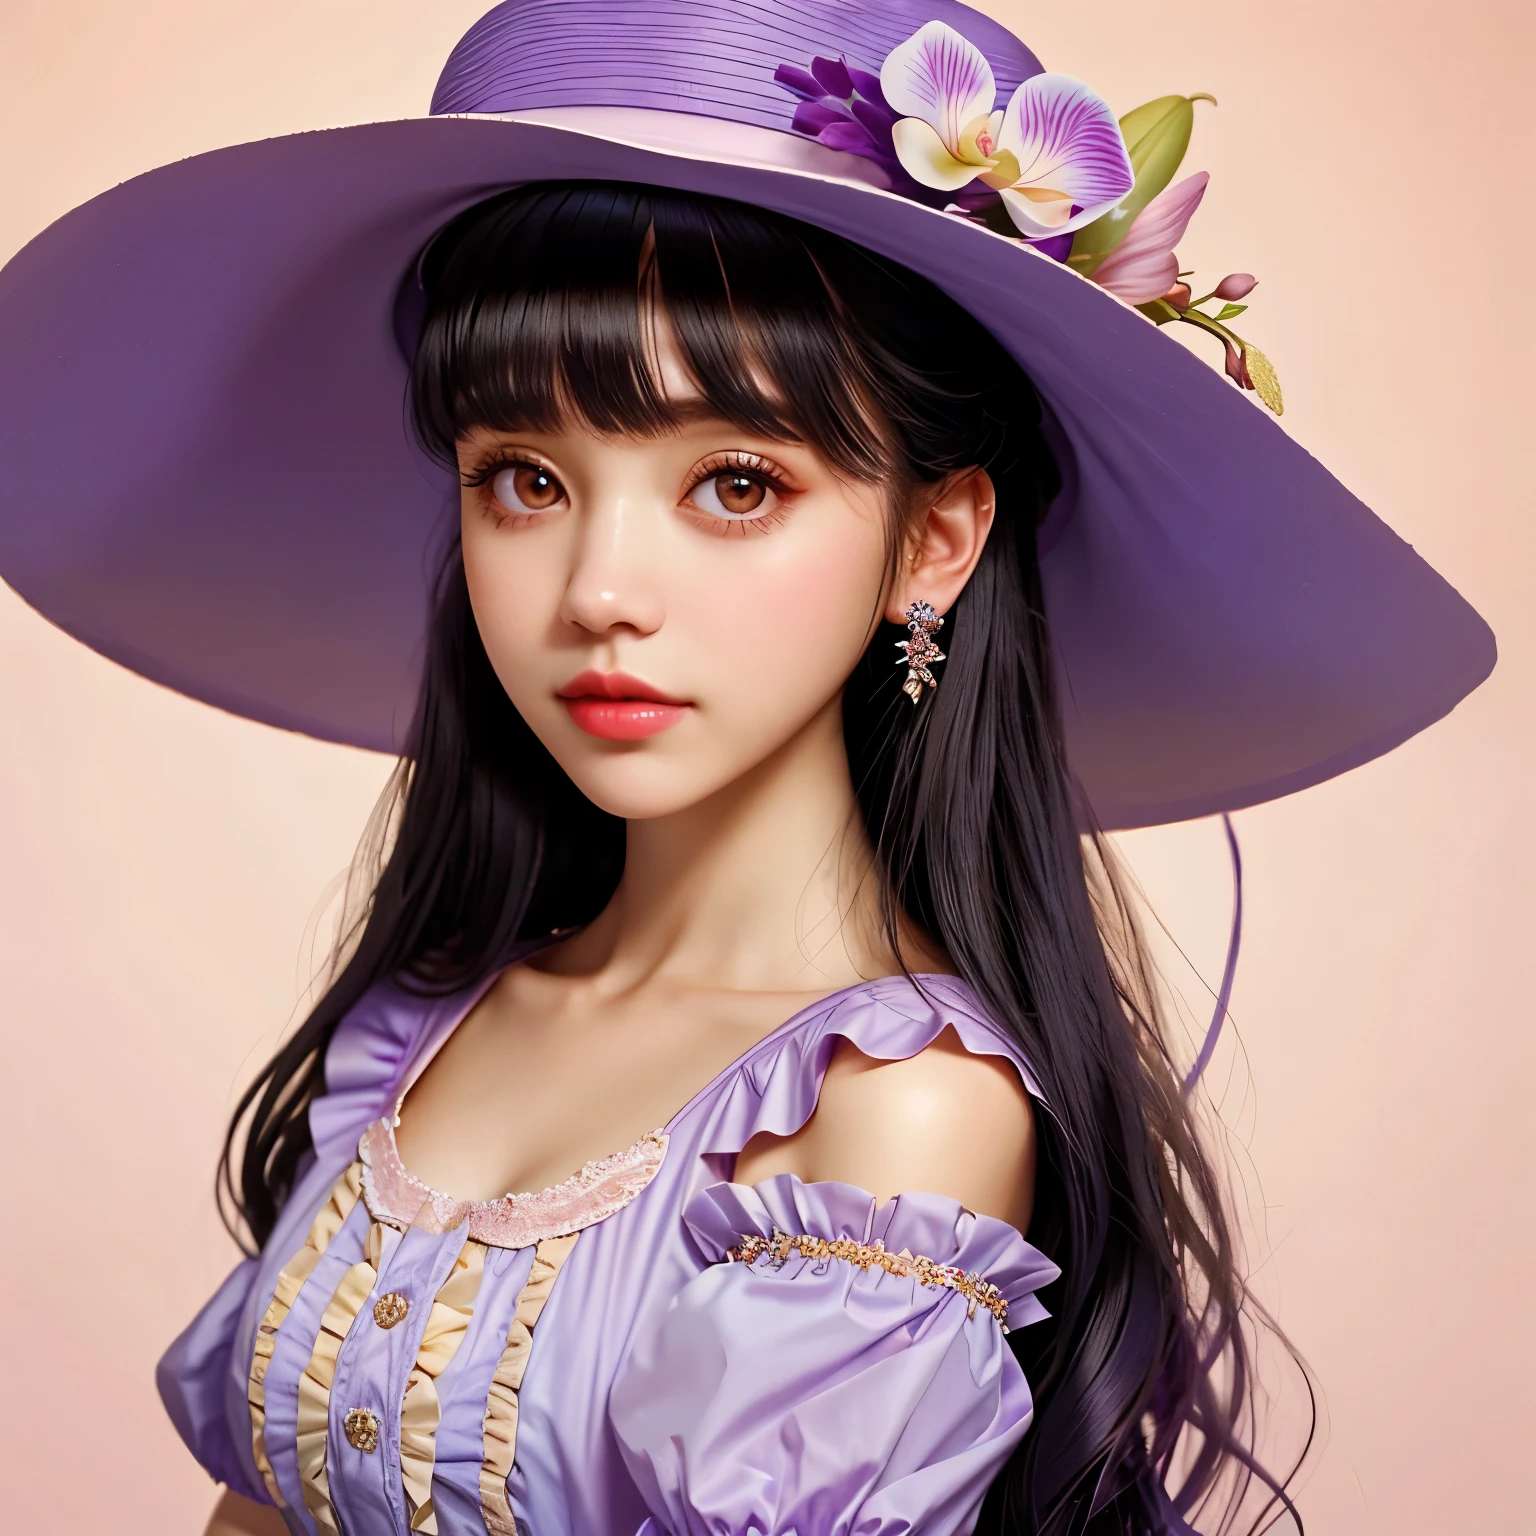 a close up of a woman with a hat and a dress, melanie martinez, her face looks like an orchid, she looks like a mix of grimes, # rococo, old timey, belle delphine, her hair is white, photographed on colour film, beautiful stella maeve magician, with hat, gorgeous stella maeve magician, & her expression is solemn